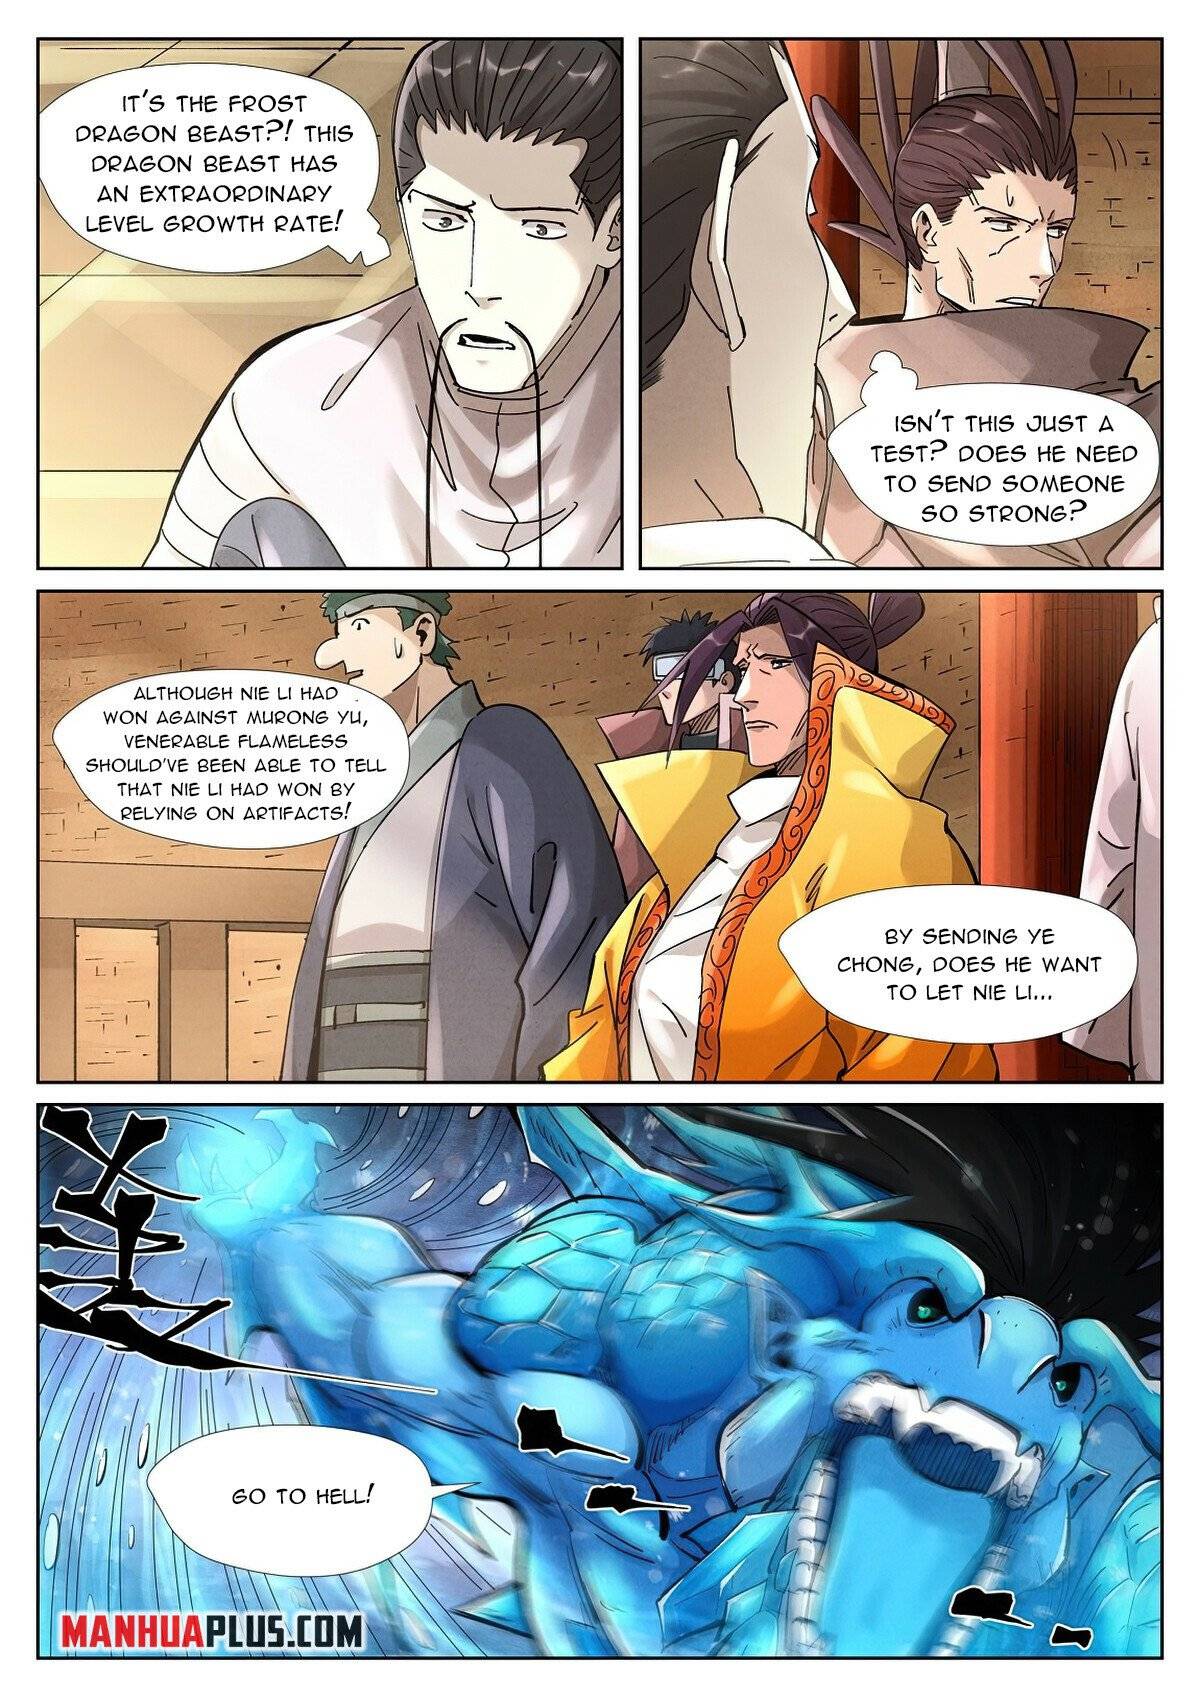 Tales of Demons and Gods Manhua Chapter 371.5 - Page 3